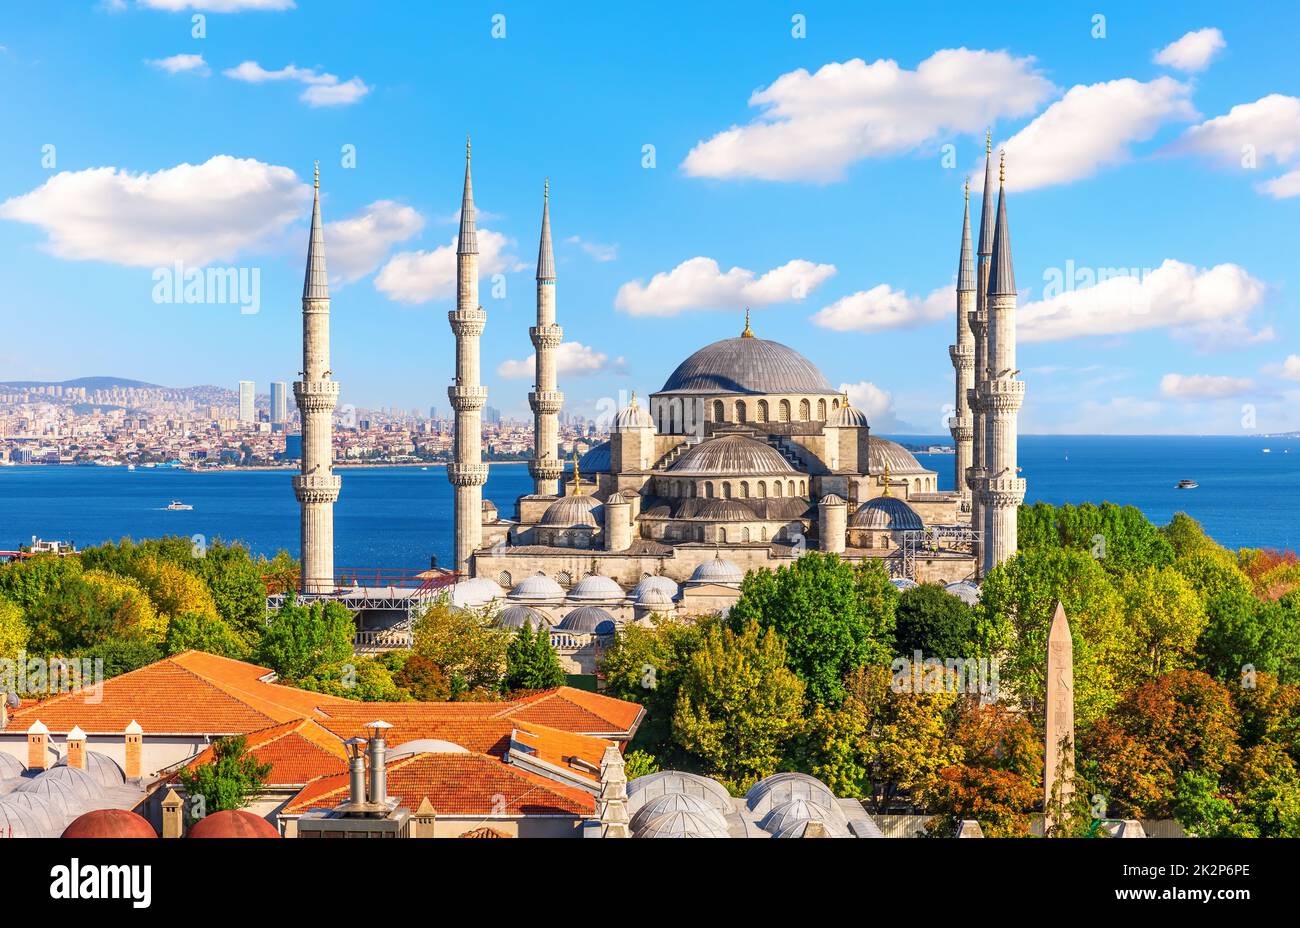 Istanbul roofs by The Blue Mosque or Sultan Ahmet Mosque, Bosphorus, Turkey Stock Photo